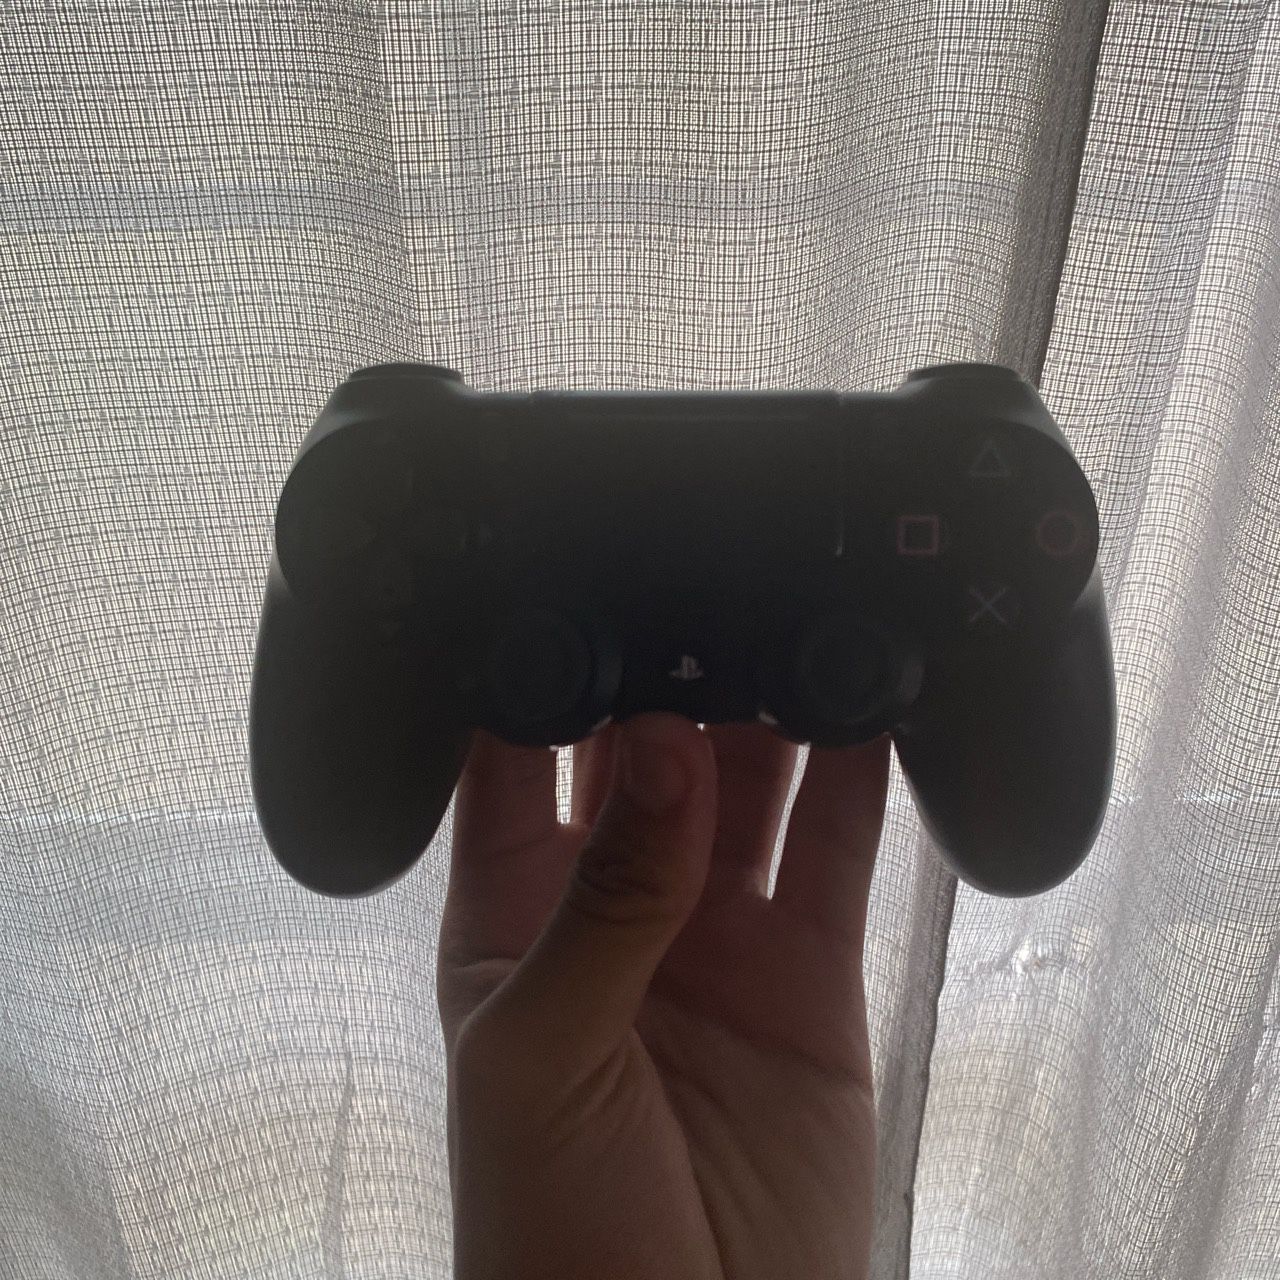 2 PS4 DualShock Controllers